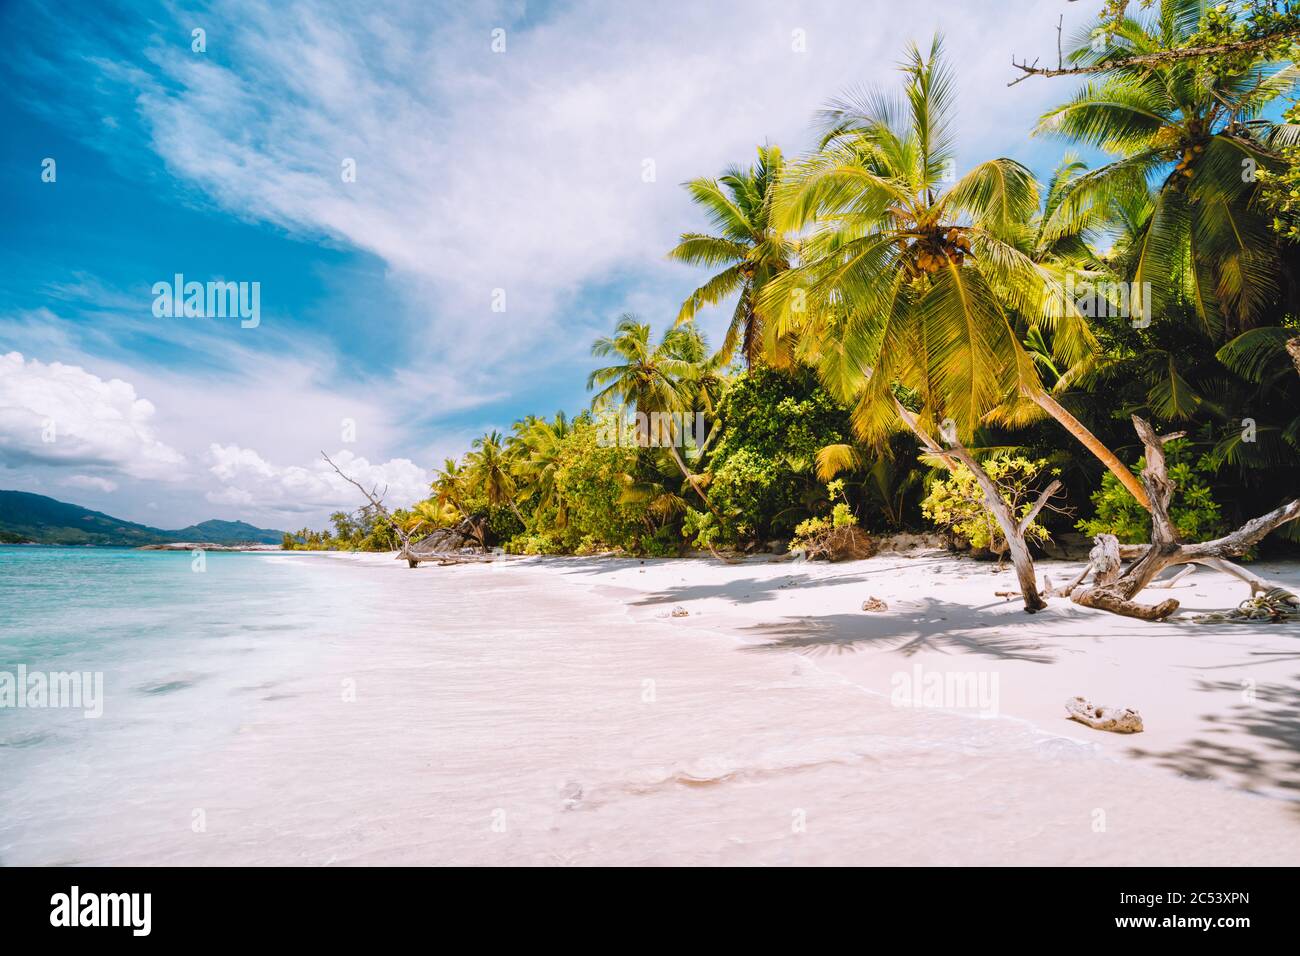 Vacation holiday background exotic wallpaper. Sunny day on paradise beach. White sand, palm trees and blue ocean lagoon. Stock Photo